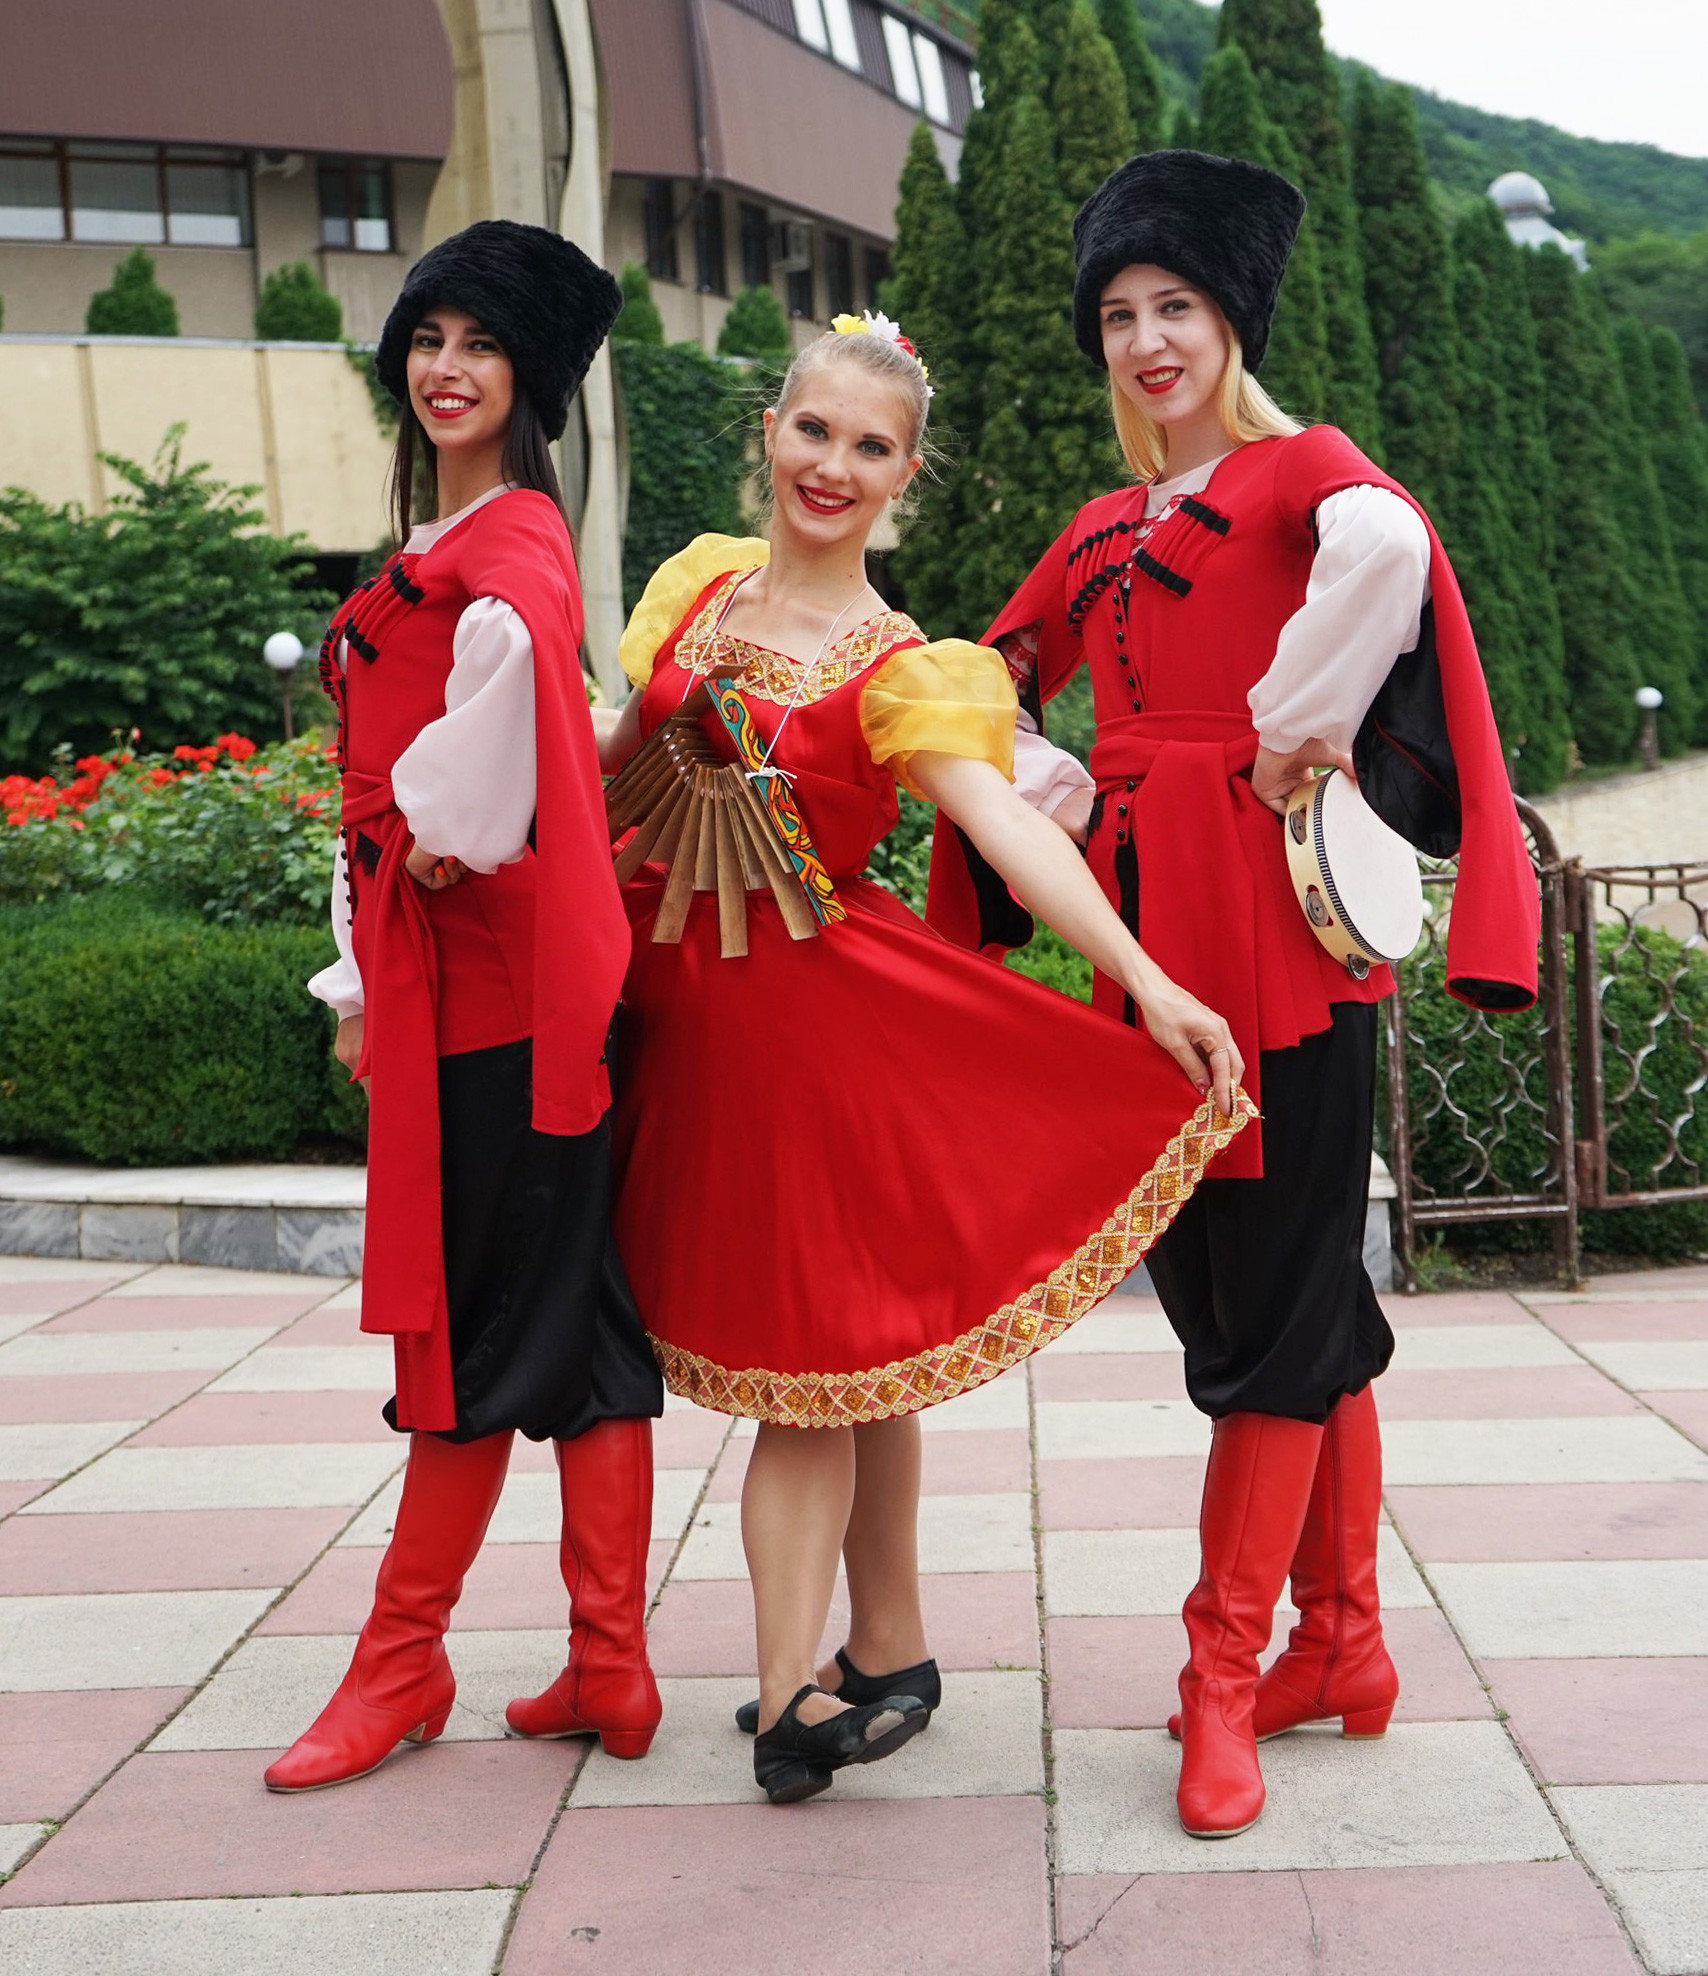 This troupe of dancers in classic Caucasian attire are doing shows at old Soviet style sanatoriums in the traditional Russian spa towns of Piatigorsk and Kislovdsk. Both were favorites with the Russian tsars, aristocracy and artists. Nowadays these towns exude the morbid charm of a bygone era.